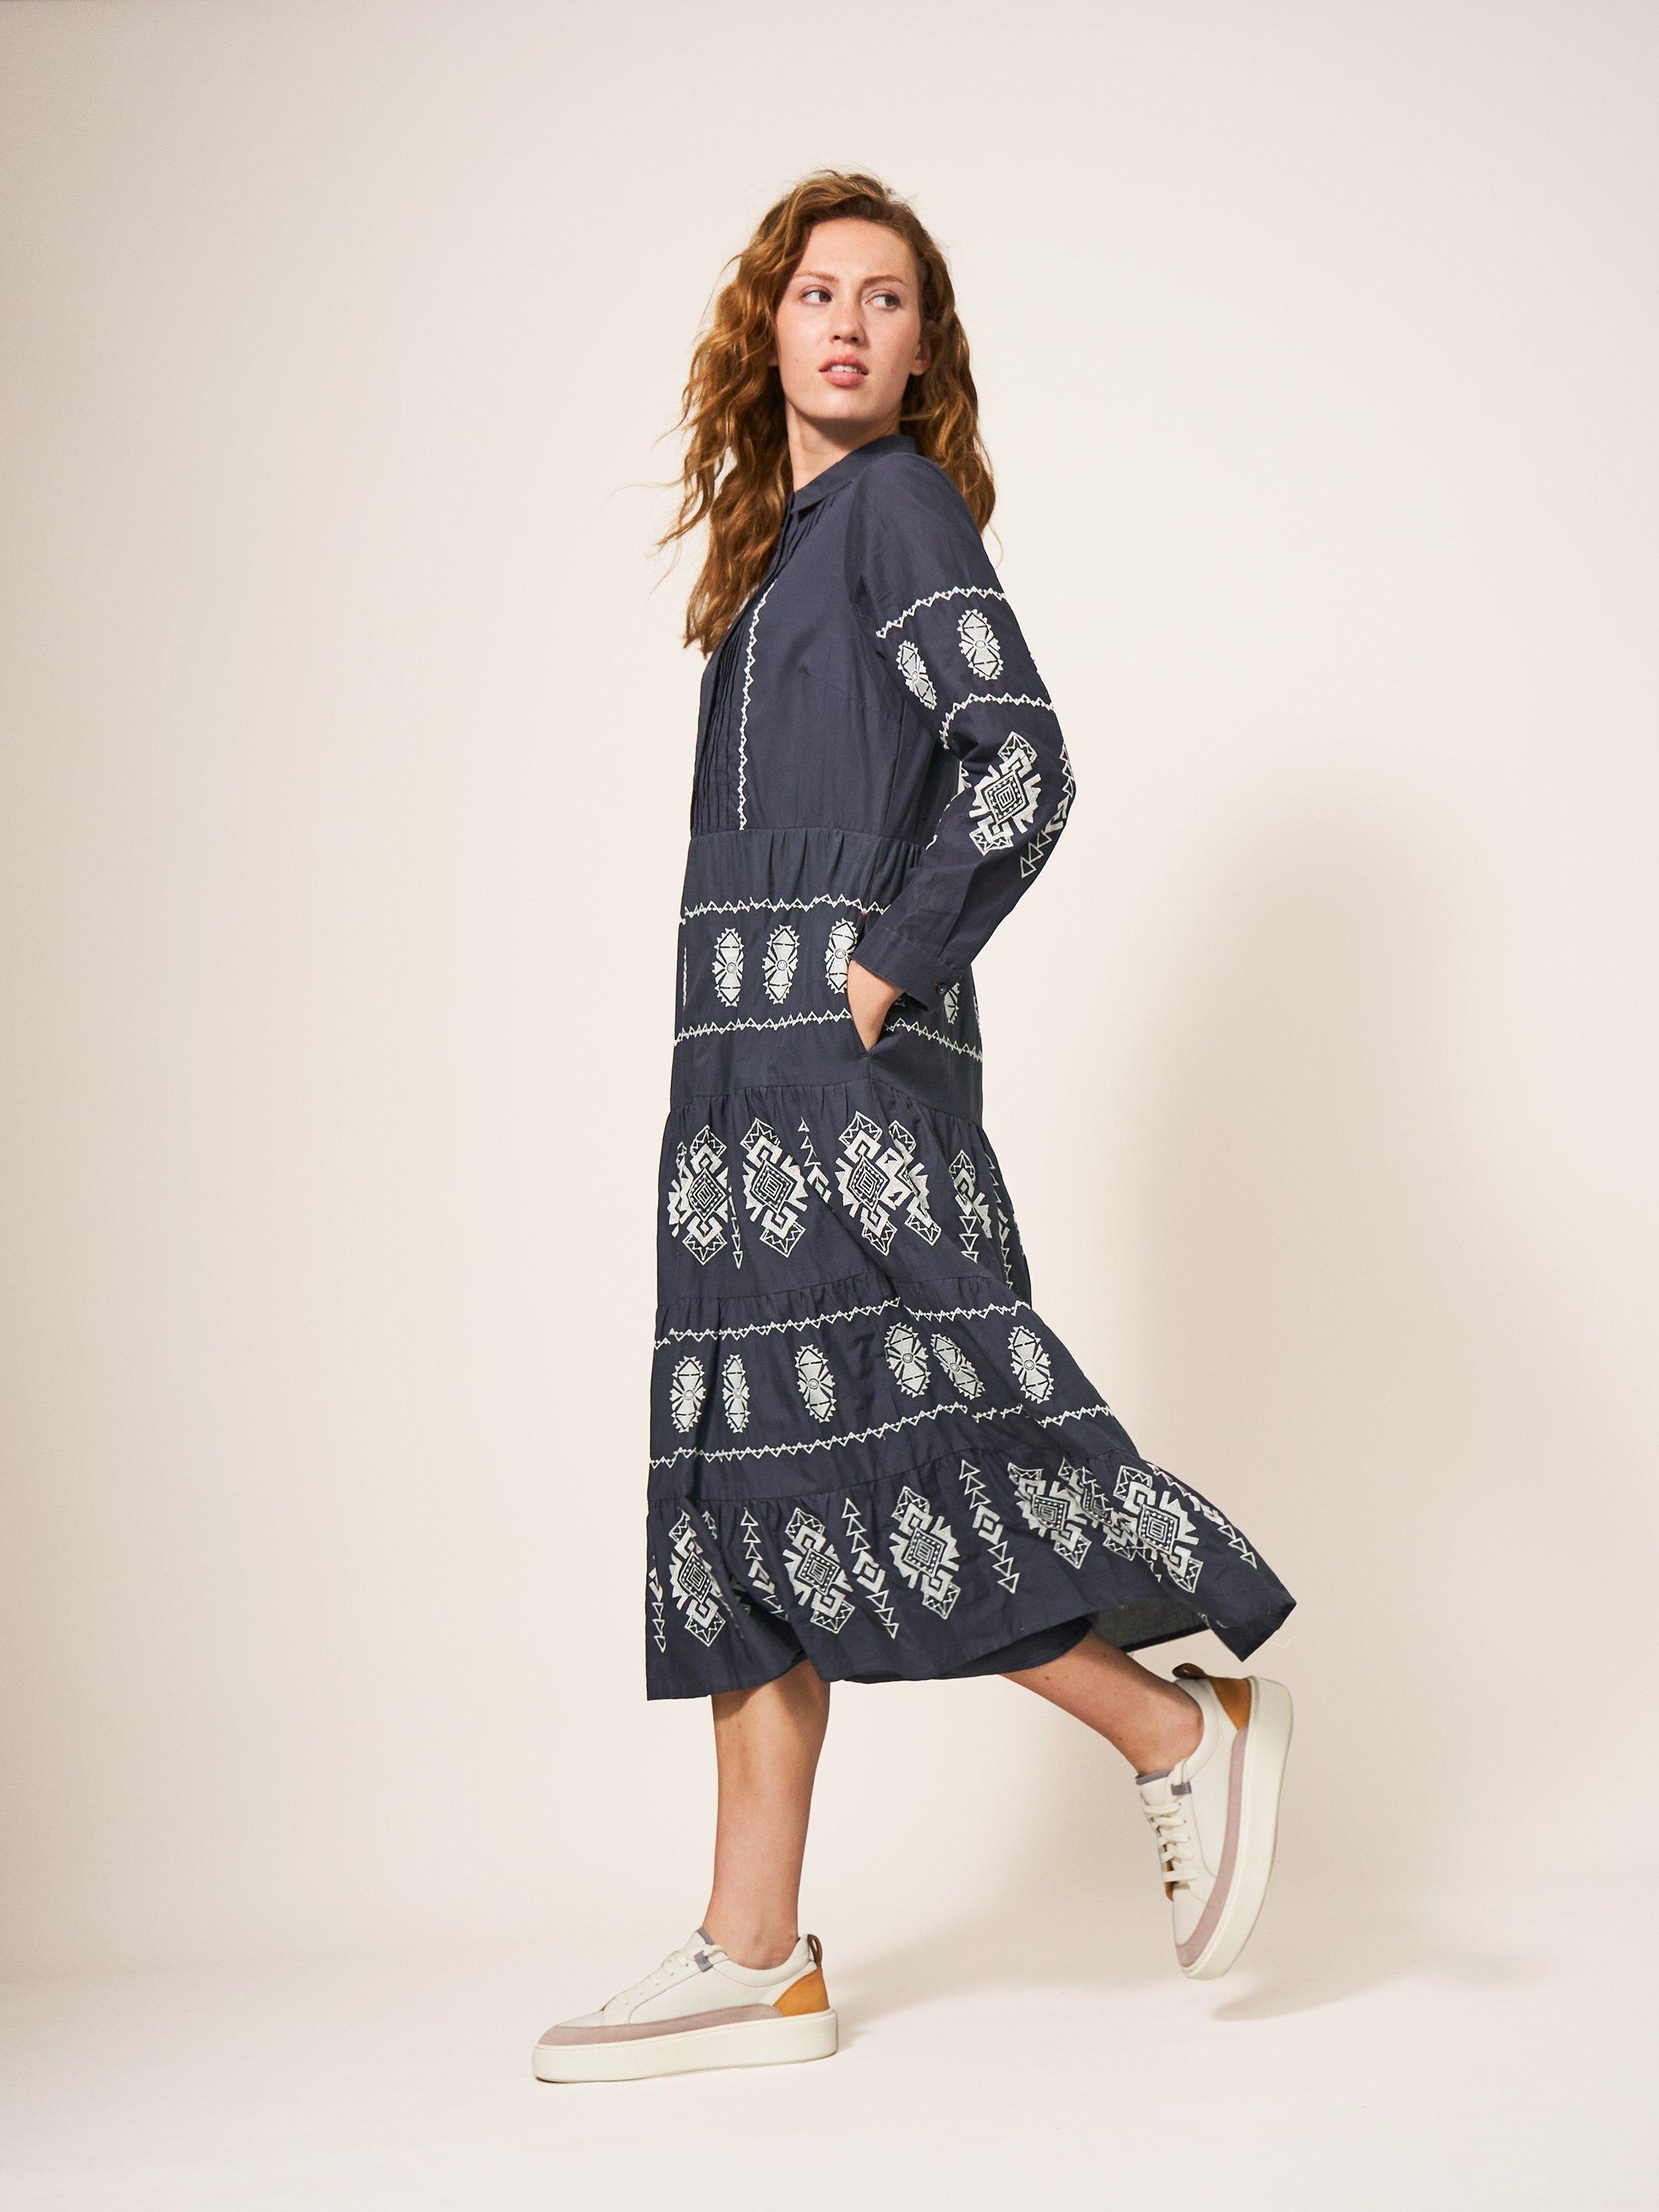 Emmie Embroidered Midi Dress in GREY MLT - LIFESTYLE